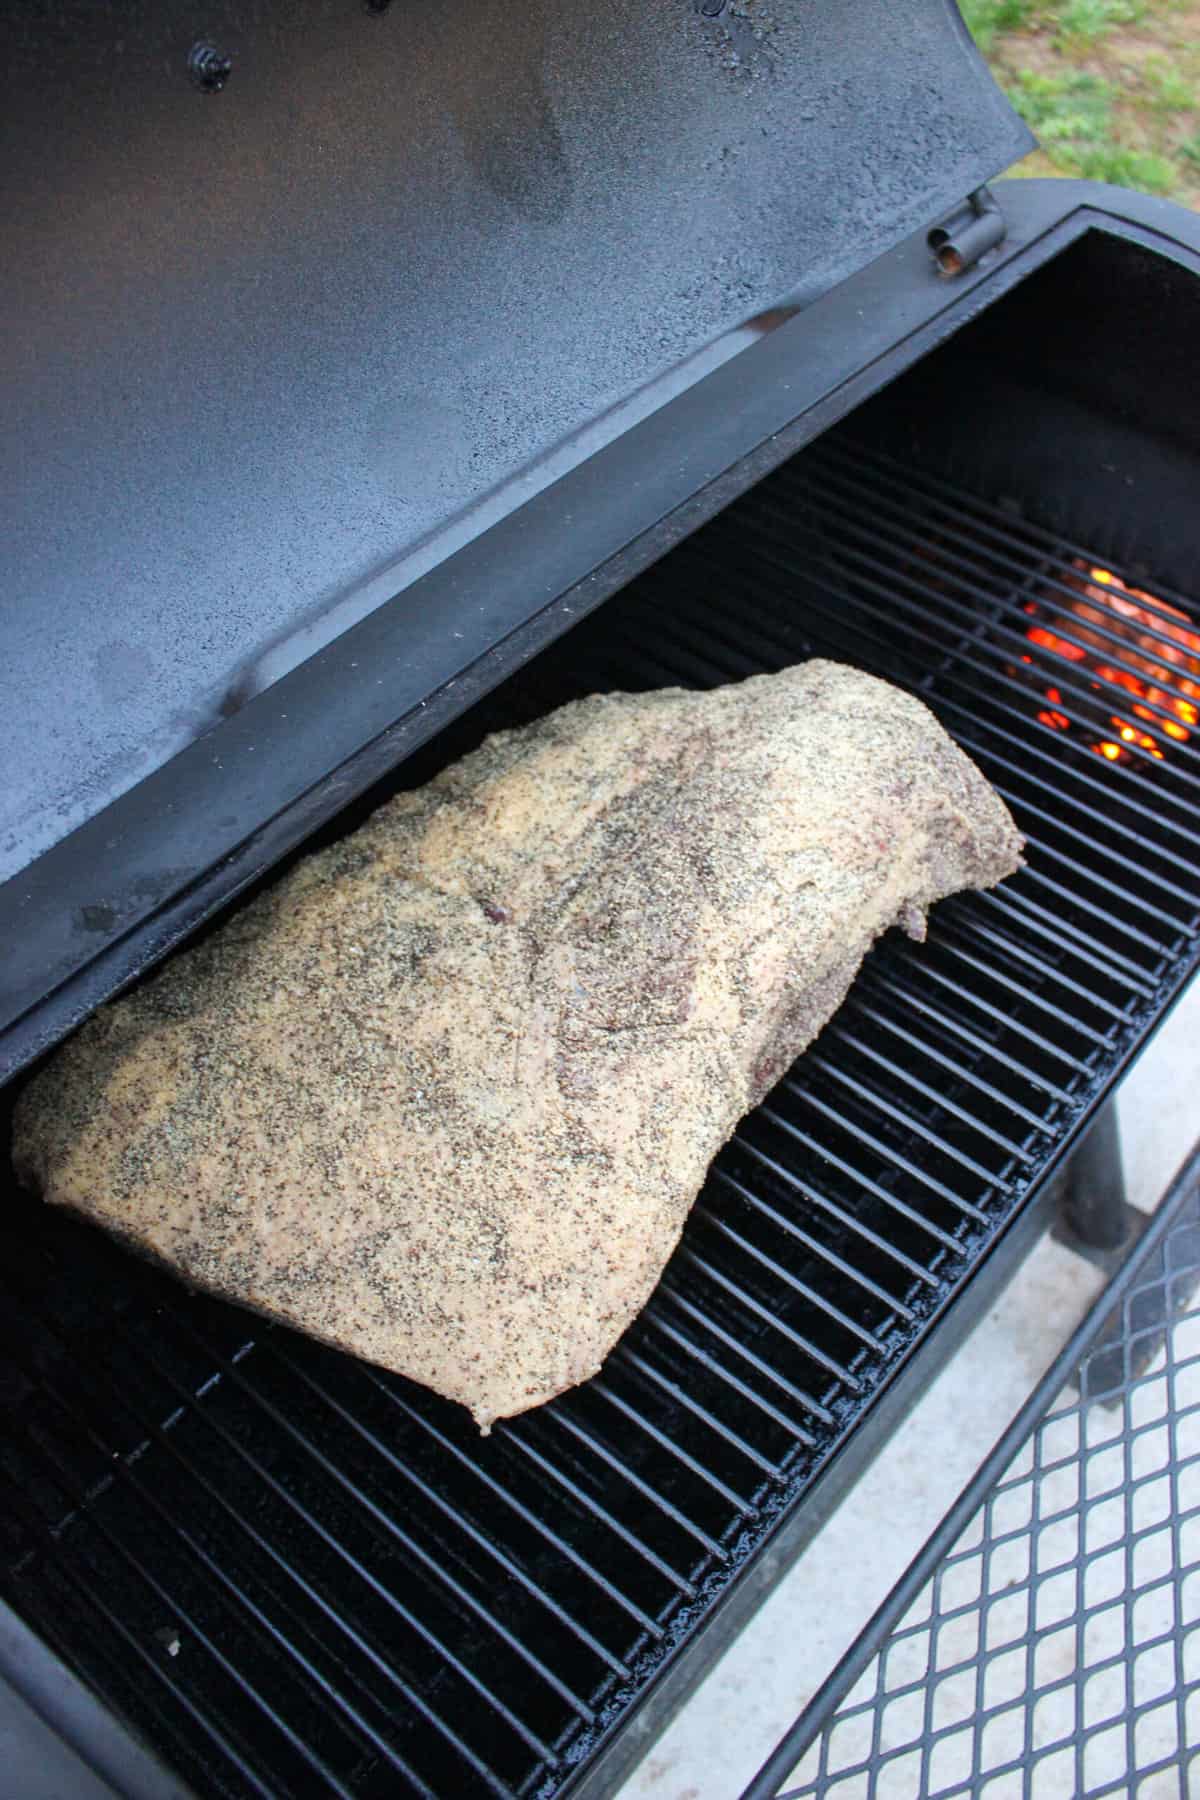 The smoked brisket recipe getting started by placing the seasoned brisket on the smoker.